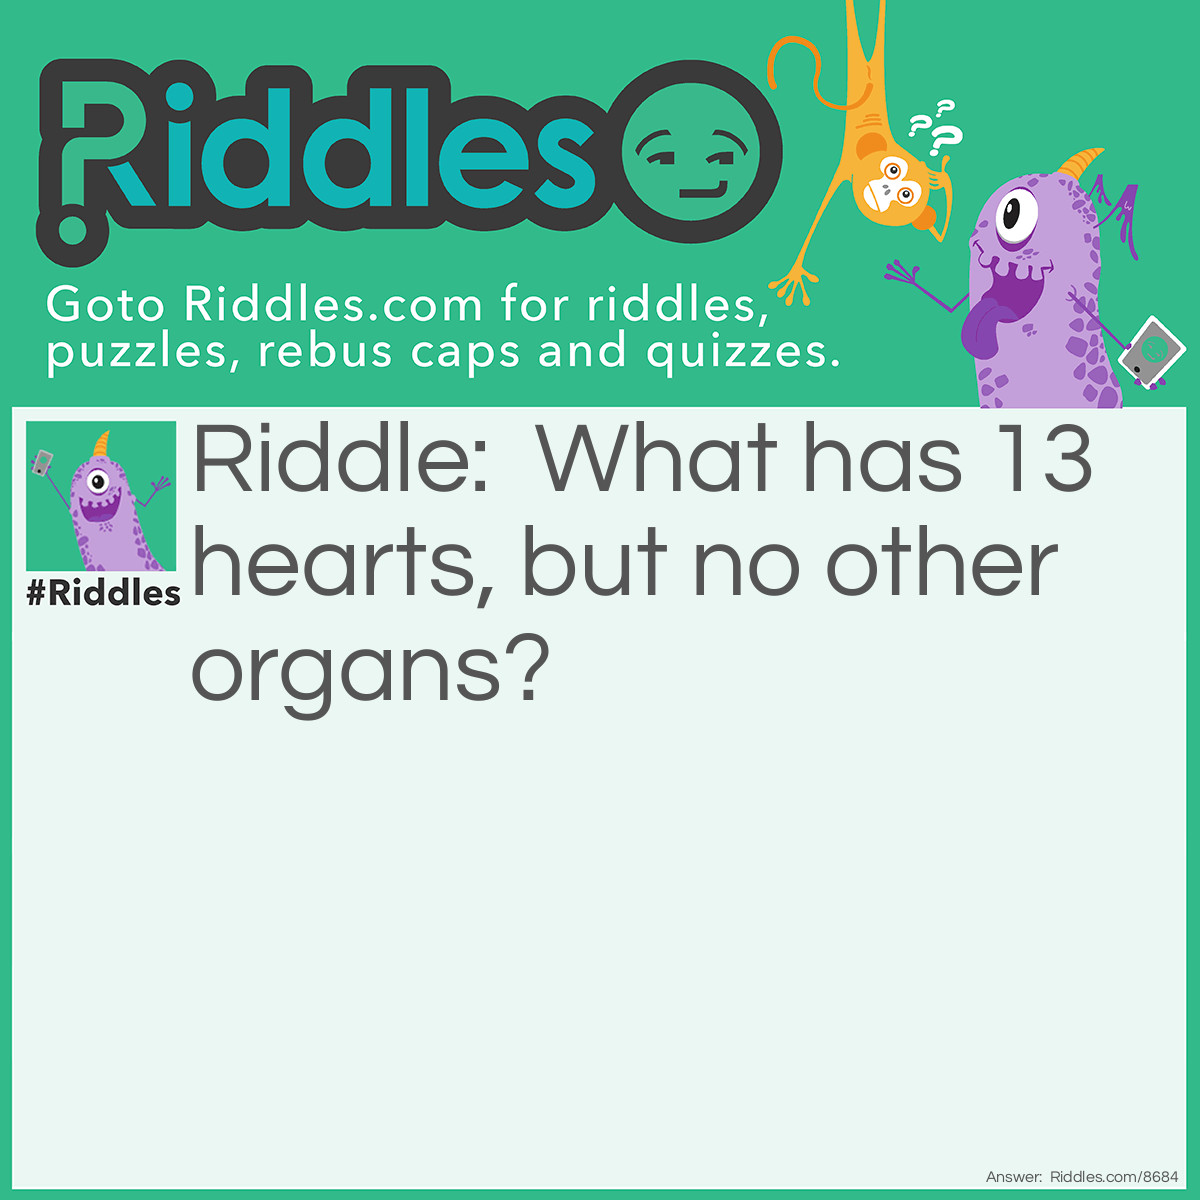 Riddle: What has 13 hearts, but no other organs? Answer: A deck of cards.